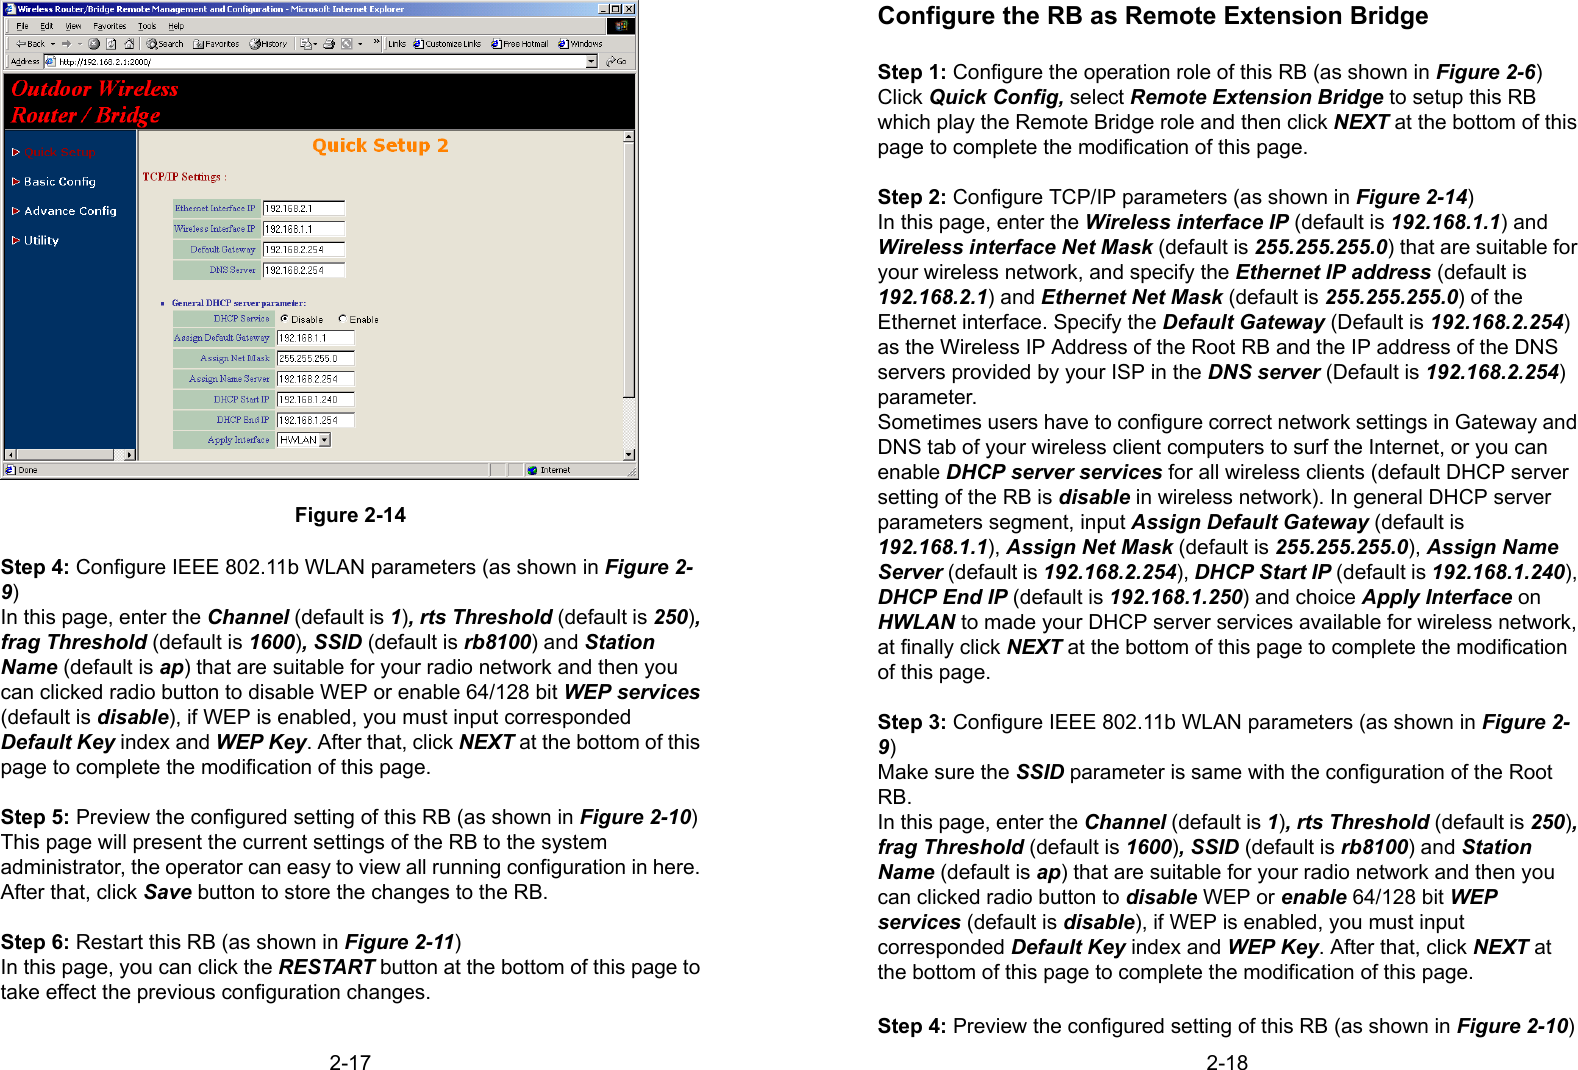 2-17Figure 2-14Step 4: Configure IEEE 802.11b WLAN parameters (as shown in Figure 2-9)In this page, enter the Channel (default is 1), rts Threshold (default is 250),frag Threshold (default is 1600), SSID (default is rb8100) and StationName (default is ap) that are suitable for your radio network and then youcan clicked radio button to disable WEP or enable 64/128 bit WEP services(default is disable), if WEP is enabled, you must input correspondedDefault Key index and WEP Key. After that, click NEXT at the bottom of thispage to complete the modification of this page.Step 5: Preview the configured setting of this RB (as shown in Figure 2-10)This page will present the current settings of the RB to the systemadministrator, the operator can easy to view all running configuration in here.After that, click Save button to store the changes to the RB.Step 6: Restart this RB (as shown in Figure 2-11)In this page, you can click the RESTART button at the bottom of this page totake effect the previous configuration changes.2-18Configure the RB as Remote Extension BridgeStep 1: Configure the operation role of this RB (as shown in Figure 2-6)Click Quick Config, select Remote Extension Bridge to setup this RBwhich play the Remote Bridge role and then click NEXT at the bottom of thispage to complete the modification of this page.Step 2: Configure TCP/IP parameters (as shown in Figure 2-14)In this page, enter the Wireless interface IP (default is 192.168.1.1) andWireless interface Net Mask (default is 255.255.255.0) that are suitable foryour wireless network, and specify the Ethernet IP address (default is192.168.2.1) and Ethernet Net Mask (default is 255.255.255.0) of theEthernet interface. Specify the Default Gateway (Default is 192.168.2.254)as the Wireless IP Address of the Root RB and the IP address of the DNSservers provided by your ISP in the DNS server (Default is 192.168.2.254)parameter.Sometimes users have to configure correct network settings in Gateway andDNS tab of your wireless client computers to surf the Internet, or you canenable DHCP server services for all wireless clients (default DHCP serversetting of the RB is disable in wireless network). In general DHCP serverparameters segment, input Assign Default Gateway (default is192.168.1.1), Assign Net Mask (default is 255.255.255.0), Assign NameServer (default is 192.168.2.254), DHCP Start IP (default is 192.168.1.240),DHCP End IP (default is 192.168.1.250) and choice Apply Interface onHWLAN to made your DHCP server services available for wireless network,at finally click NEXT at the bottom of this page to complete the modificationof this page.Step 3: Configure IEEE 802.11b WLAN parameters (as shown in Figure 2-9)Make sure the SSID parameter is same with the configuration of the RootRB.In this page, enter the Channel (default is 1), rts Threshold (default is 250),frag Threshold (default is 1600), SSID (default is rb8100) and StationName (default is ap) that are suitable for your radio network and then youcan clicked radio button to disable WEP or enable 64/128 bit WEPservices (default is disable), if WEP is enabled, you must inputcorresponded Default Key index and WEP Key. After that, click NEXT atthe bottom of this page to complete the modification of this page.Step 4: Preview the configured setting of this RB (as shown in Figure 2-10)